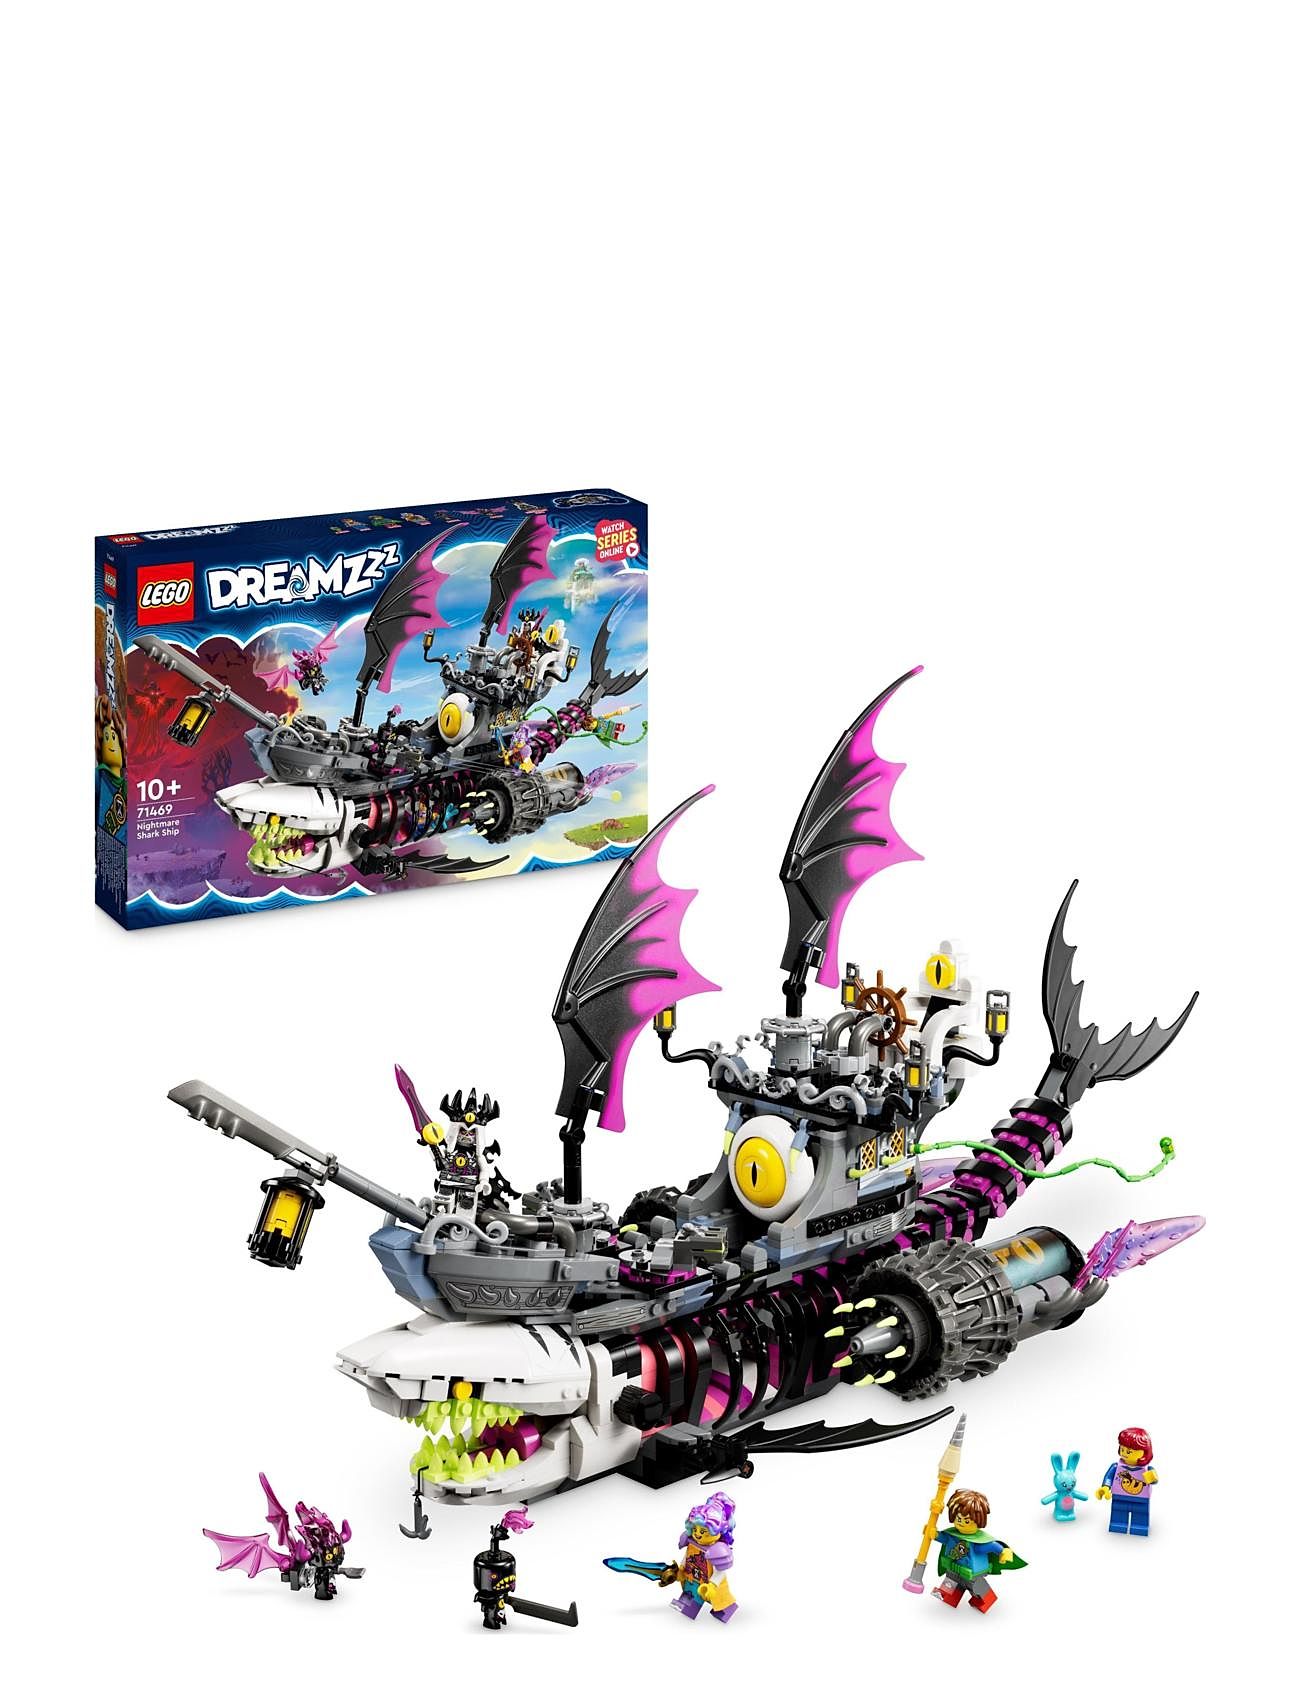 Nightmare Shark Ship, Pirate Ship Toy Toys Lego Toys Lego® Dreamzzz™ Multi/patterned LEGO